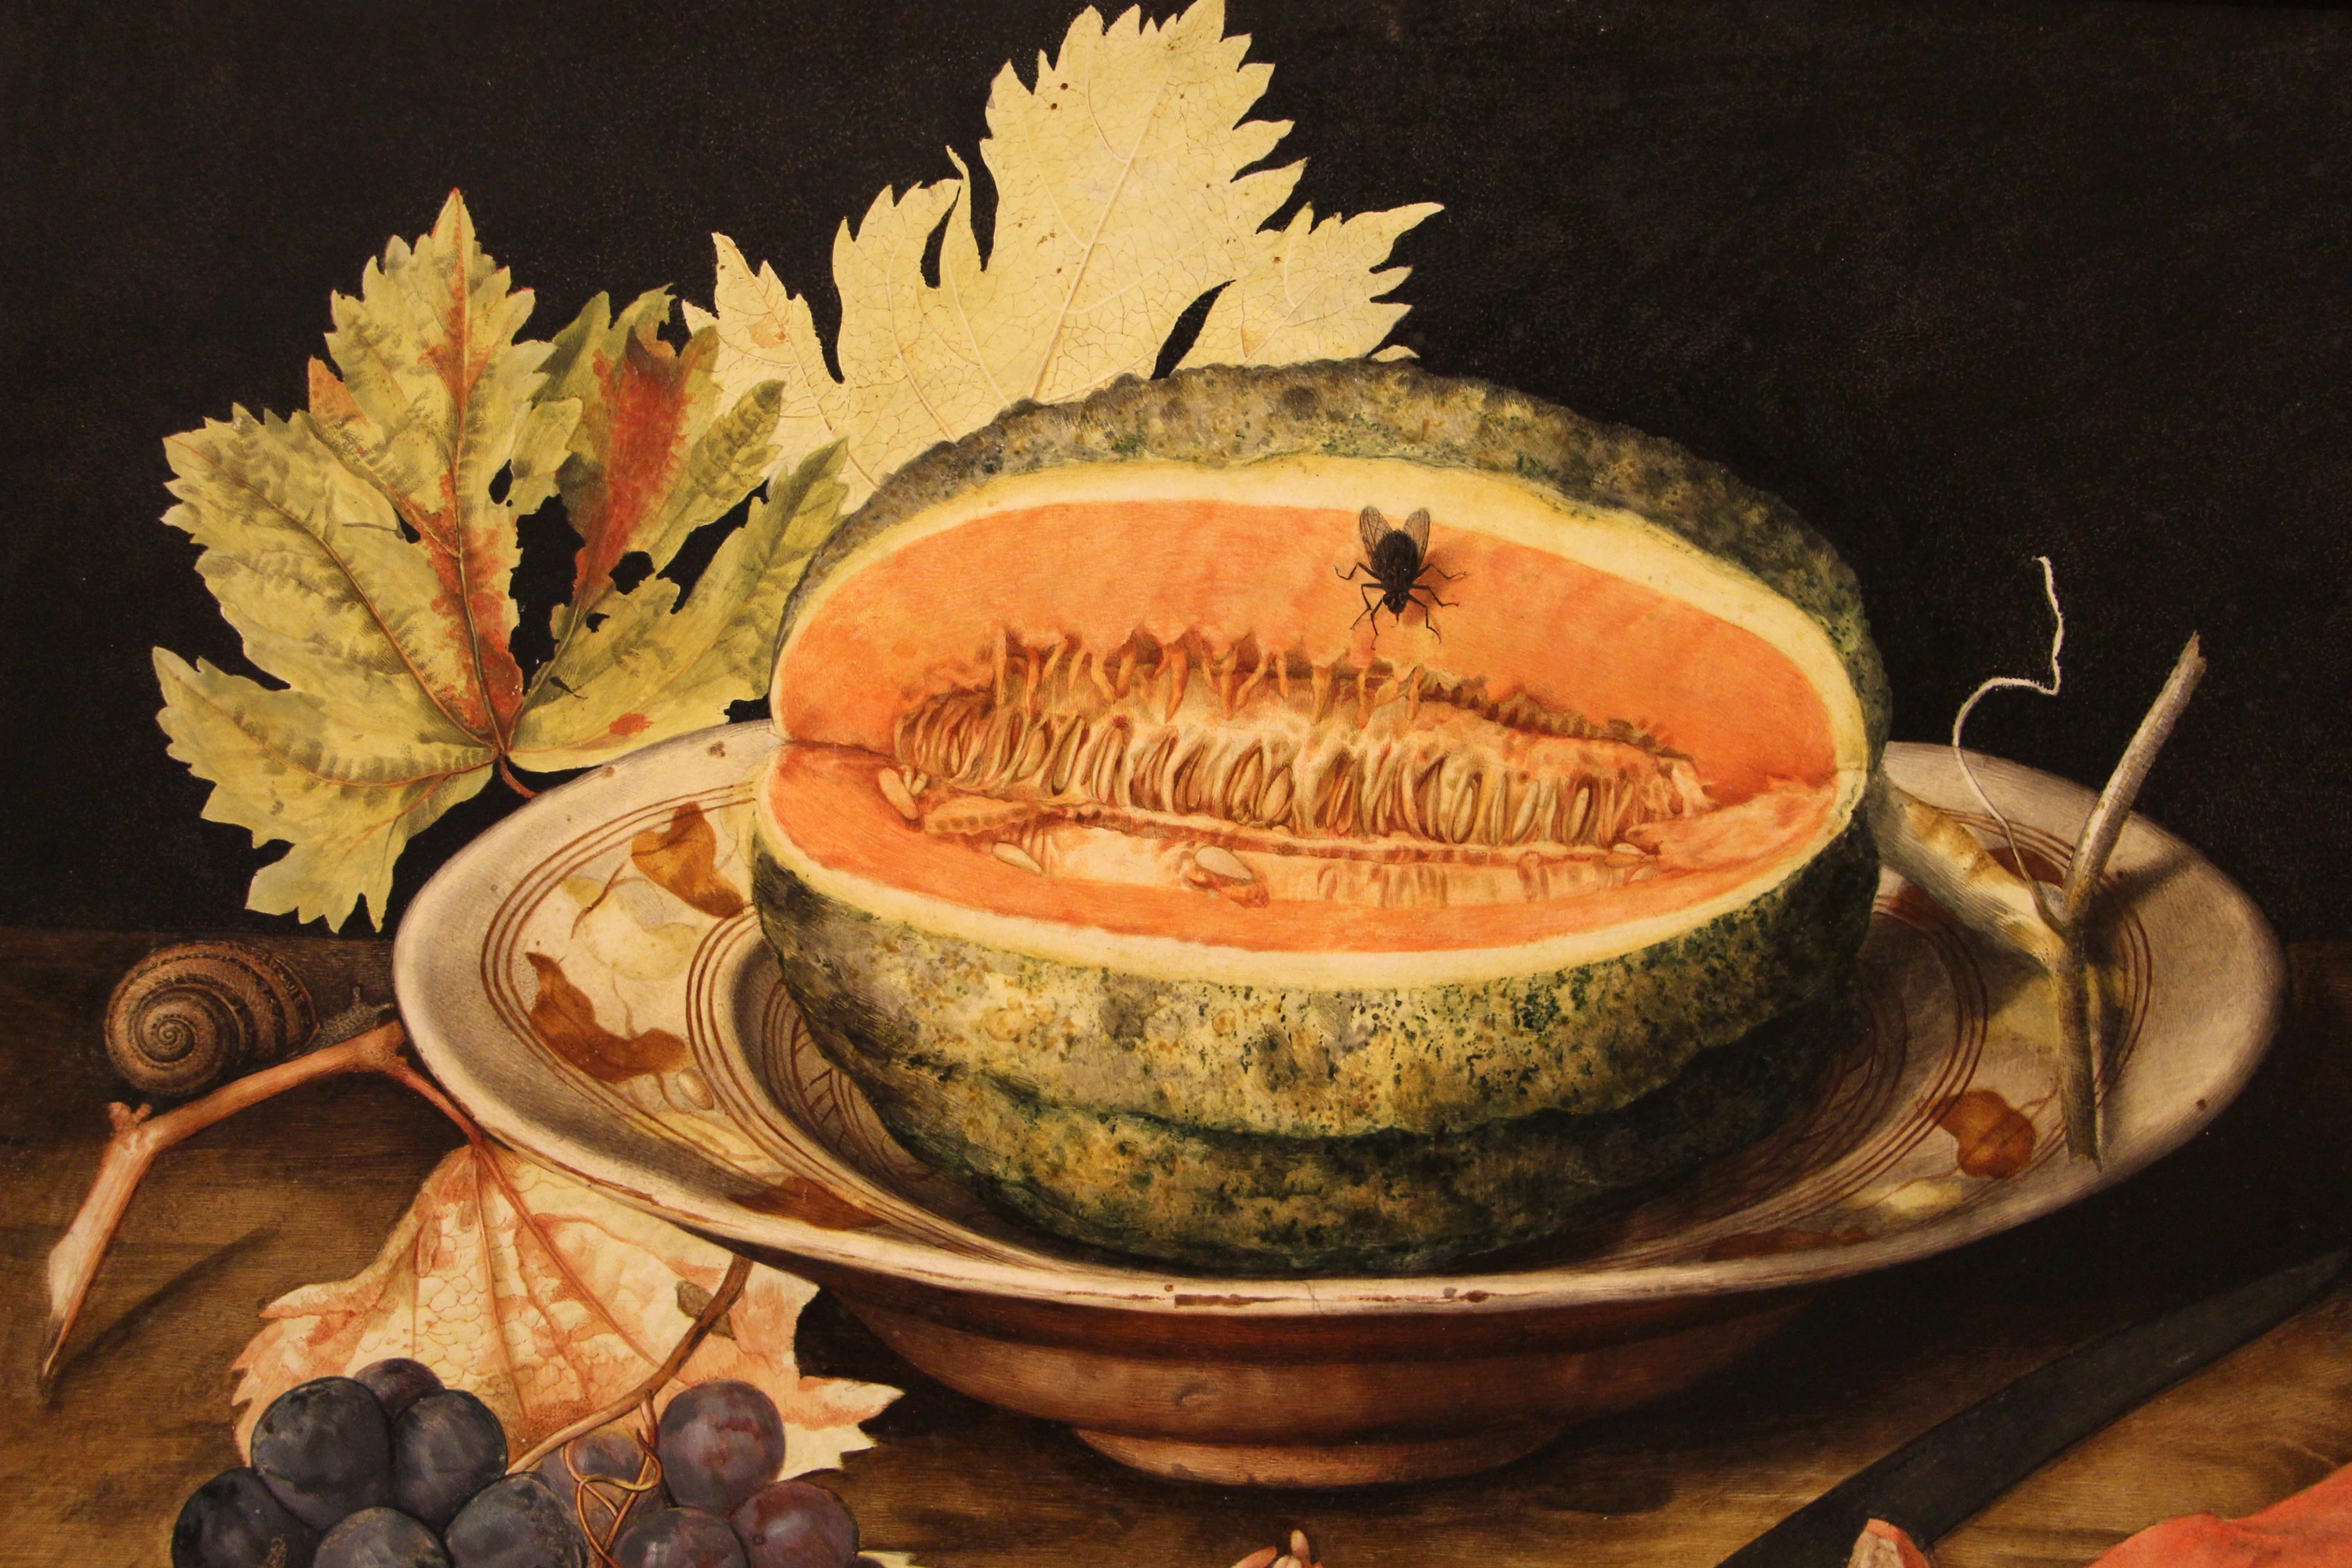 Melon on a Plate with Grapes and a Snail, Giovanna Garzoni